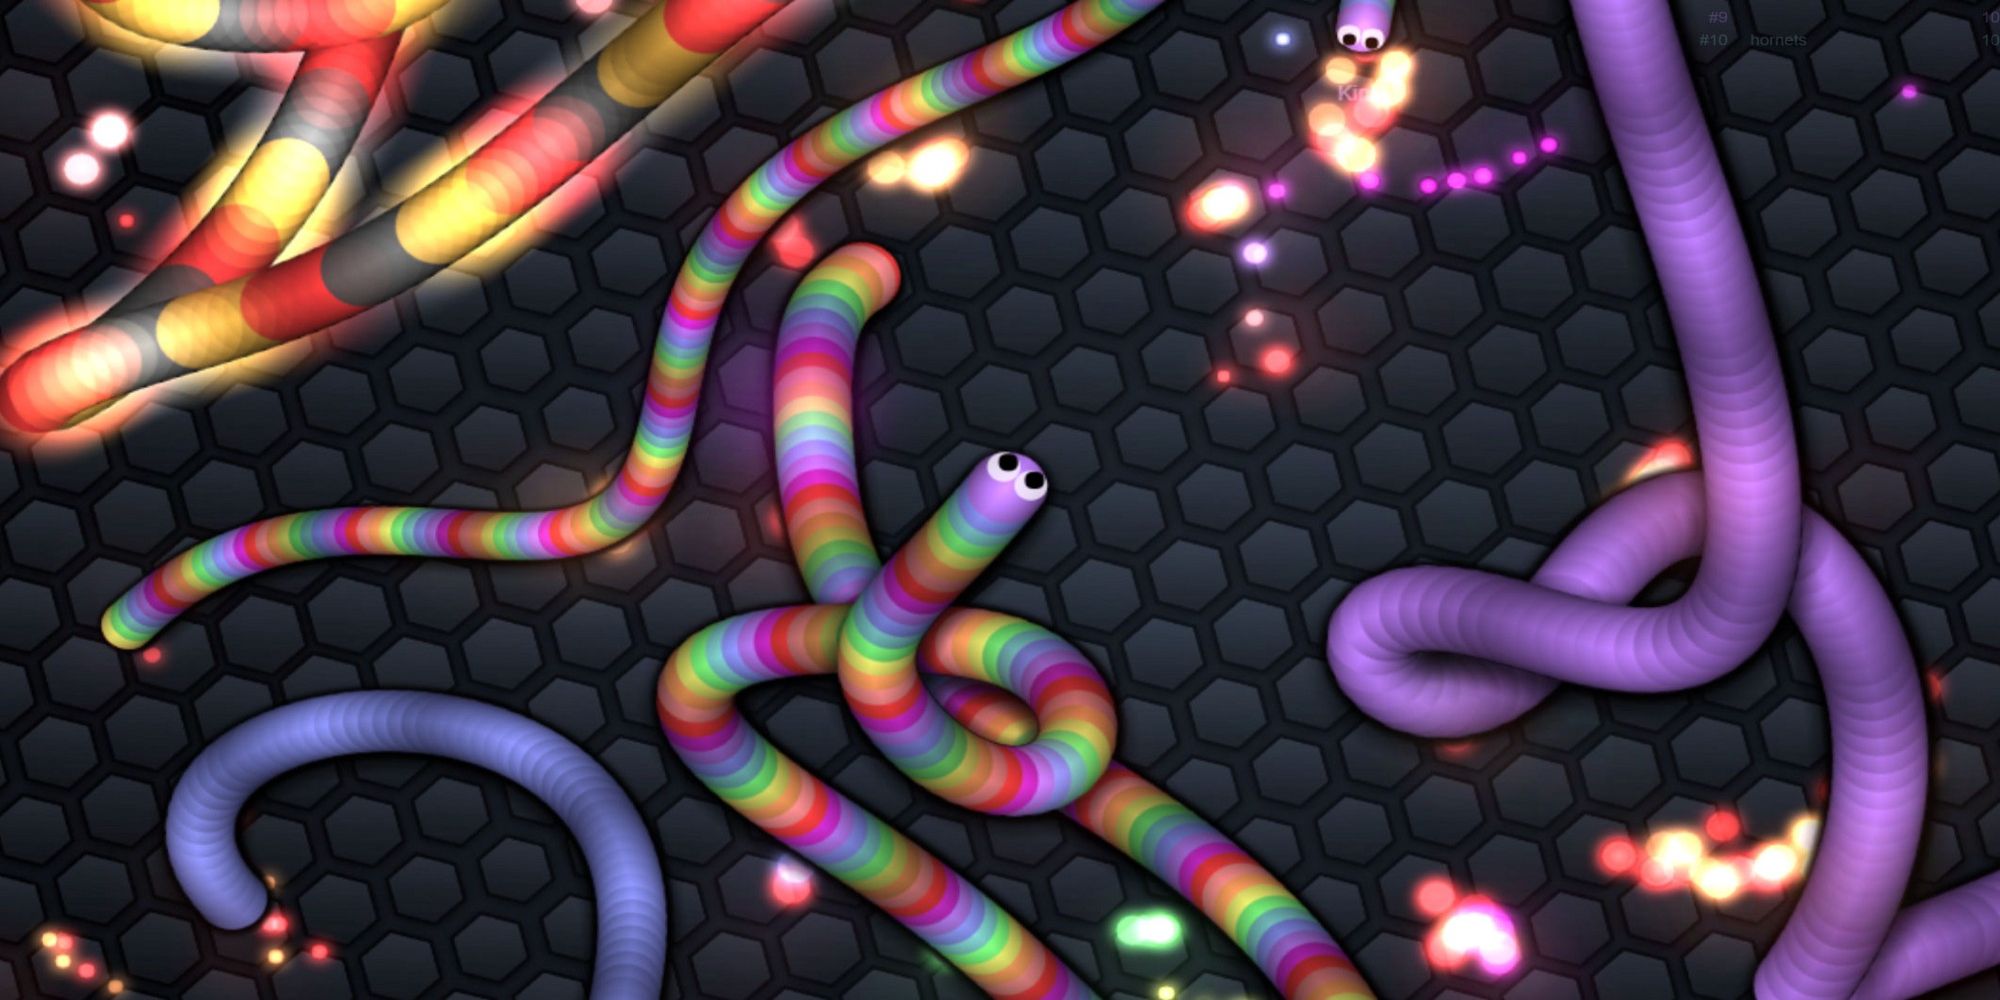 A screenshot of the browser game slither.io.